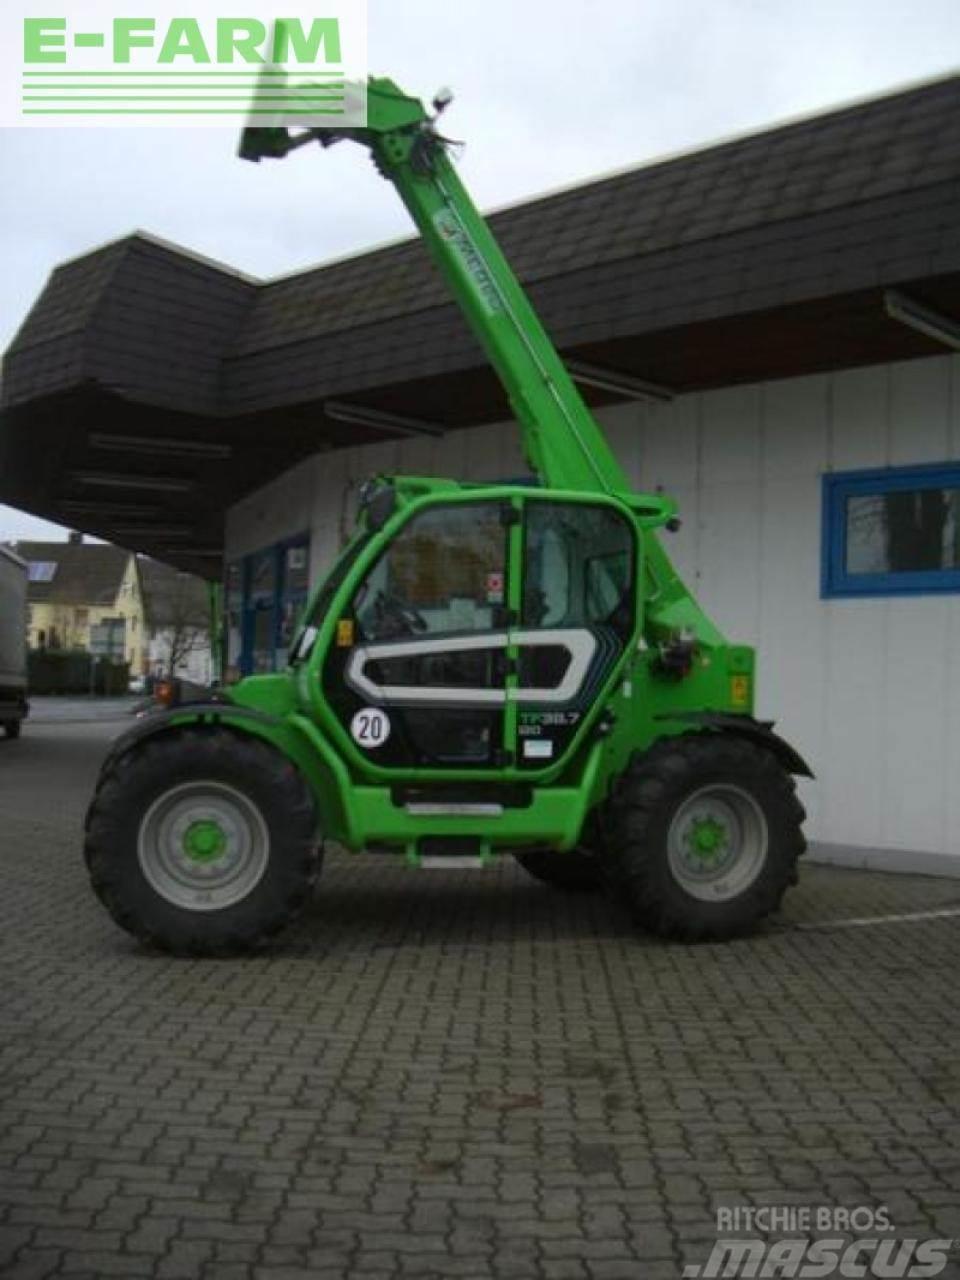 Merlo tf 38.7-120 Telehandlers for agriculture